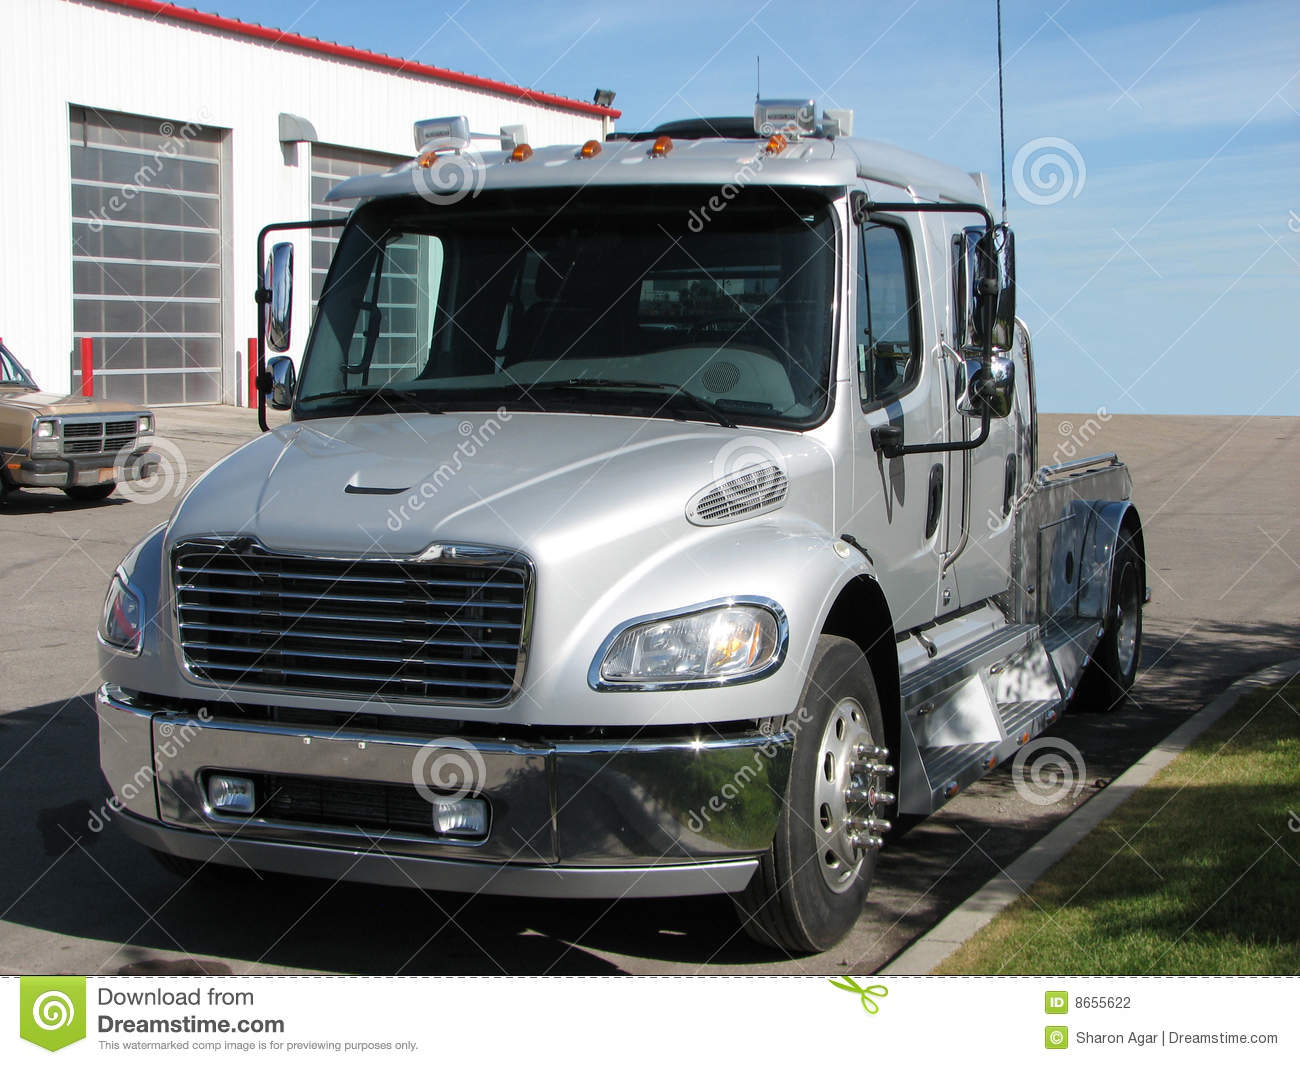 Nice Shot Of A Gray Crew Cab 4 Door Big Truck With Dual Wheels And